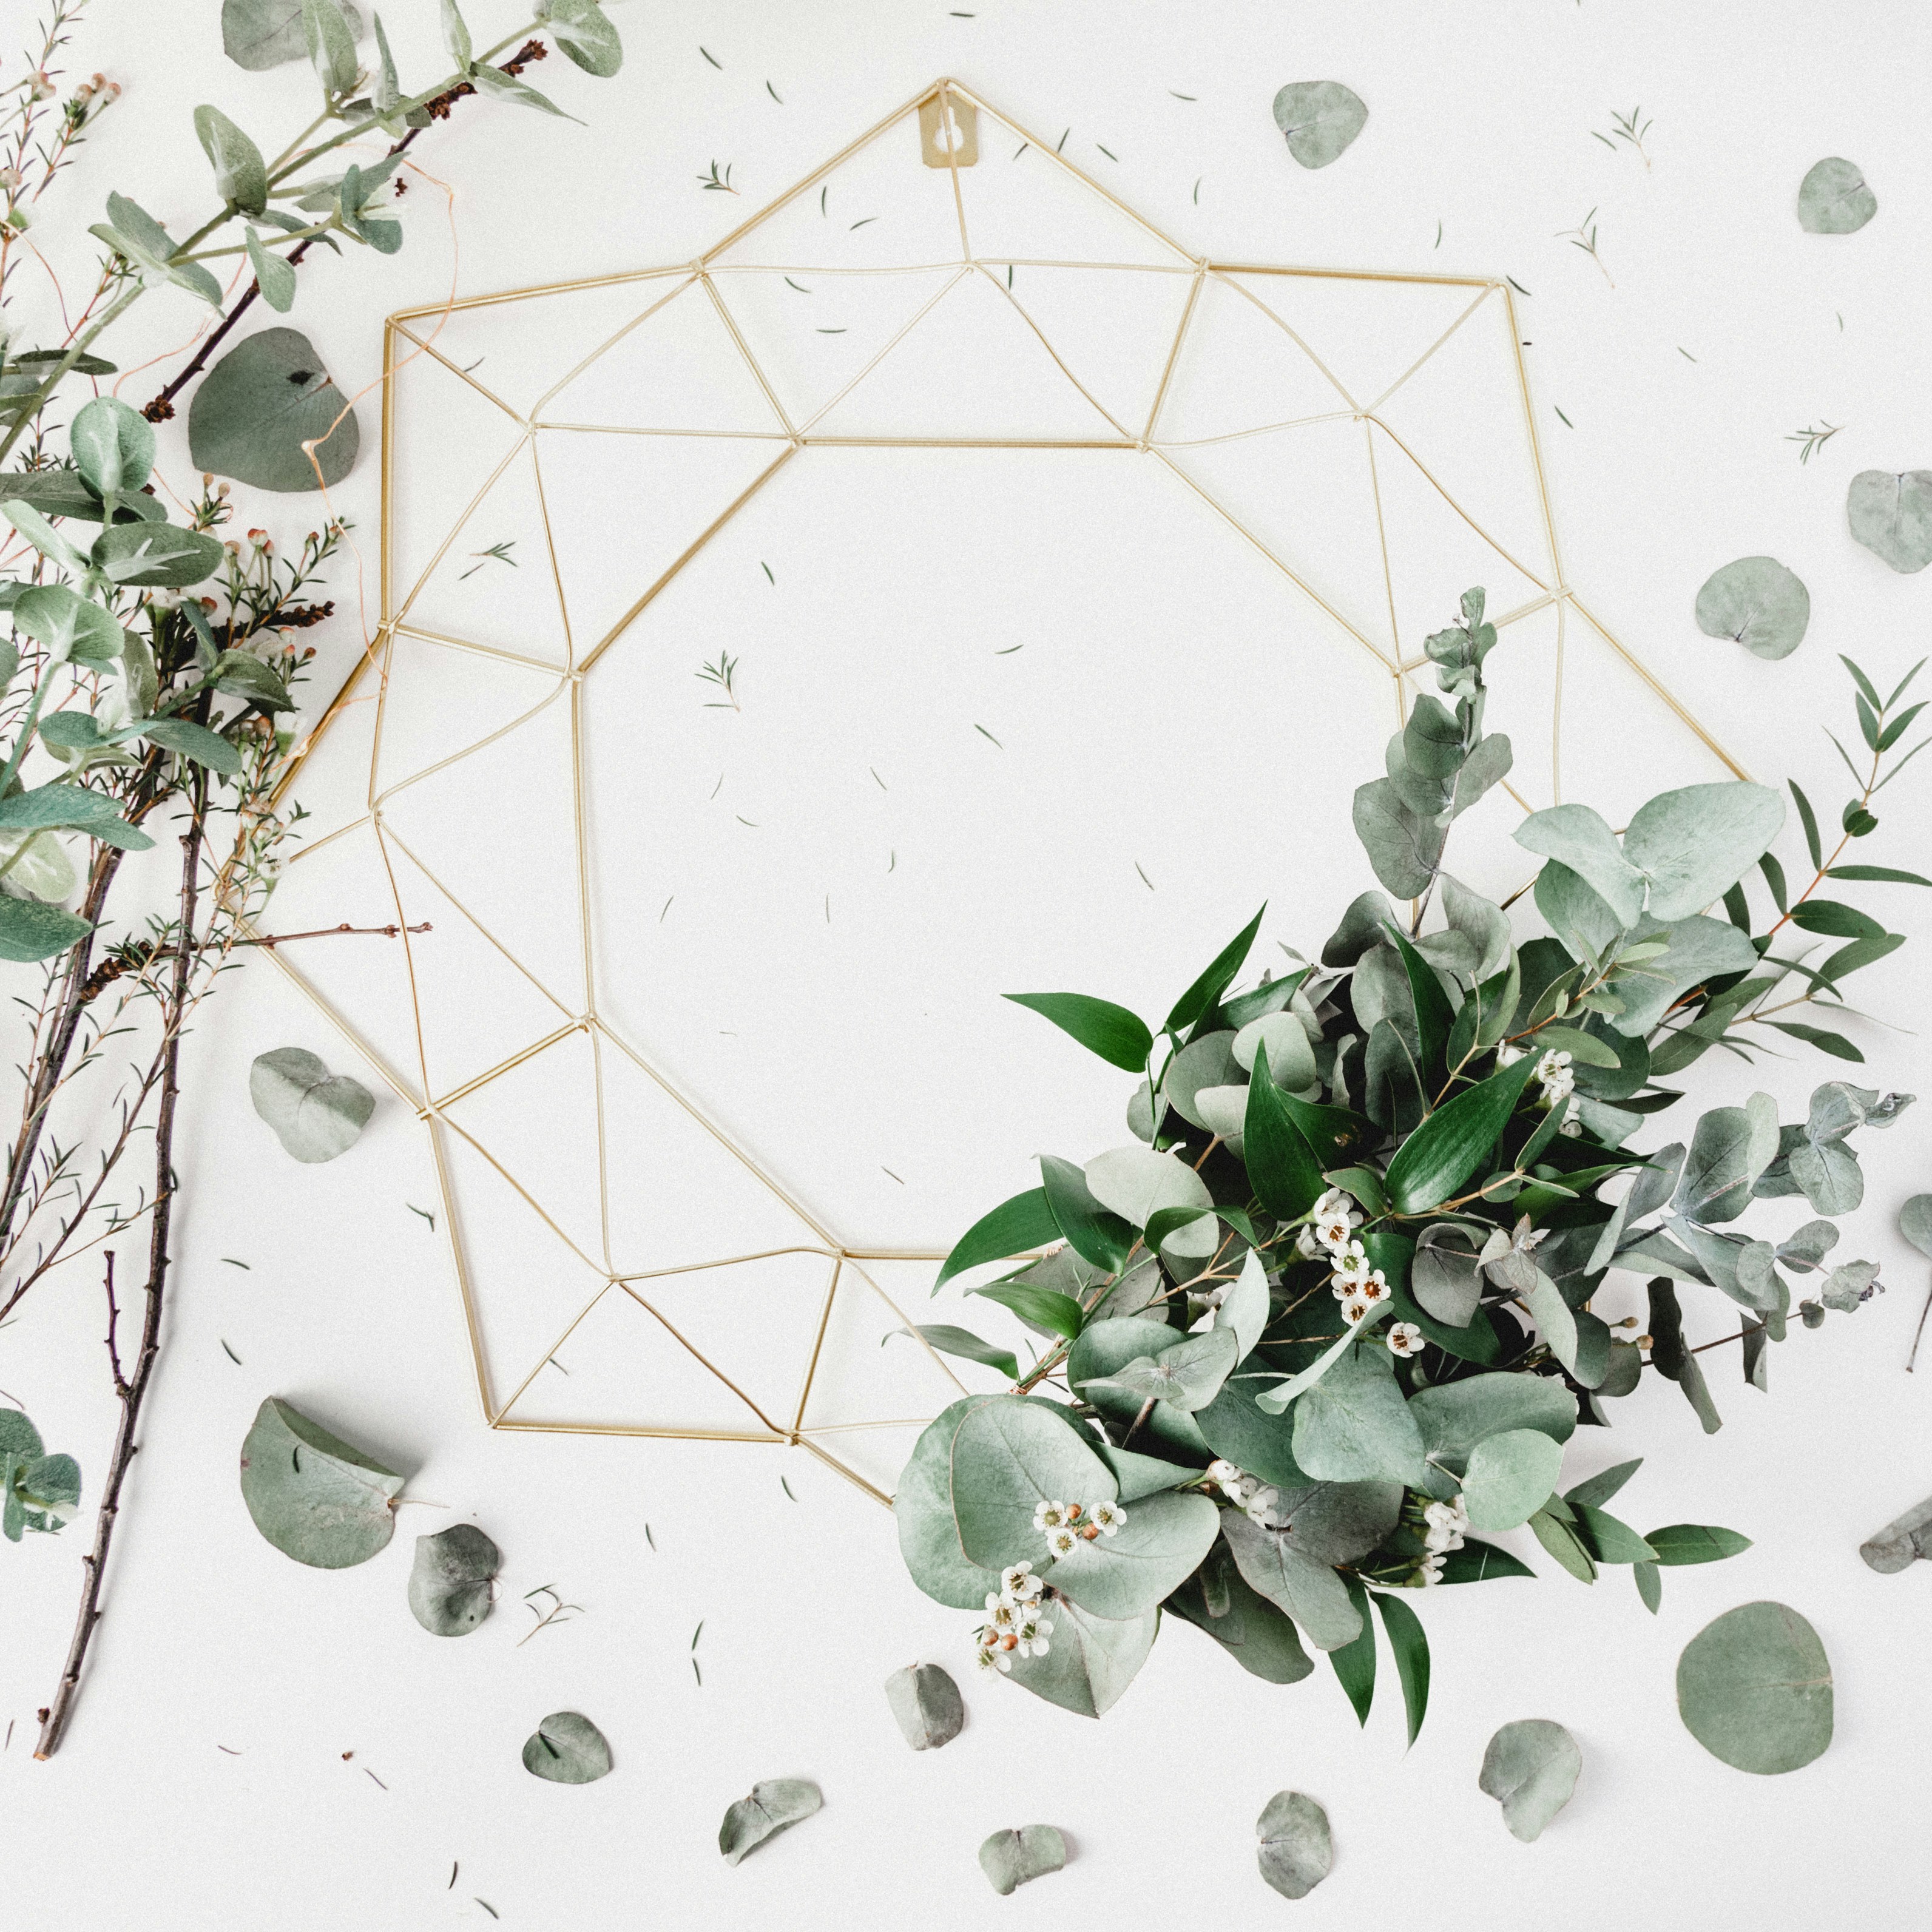 I used some leftover foliage from a photo shoot to style this gold metal geometric wreath from Hobbycraft.